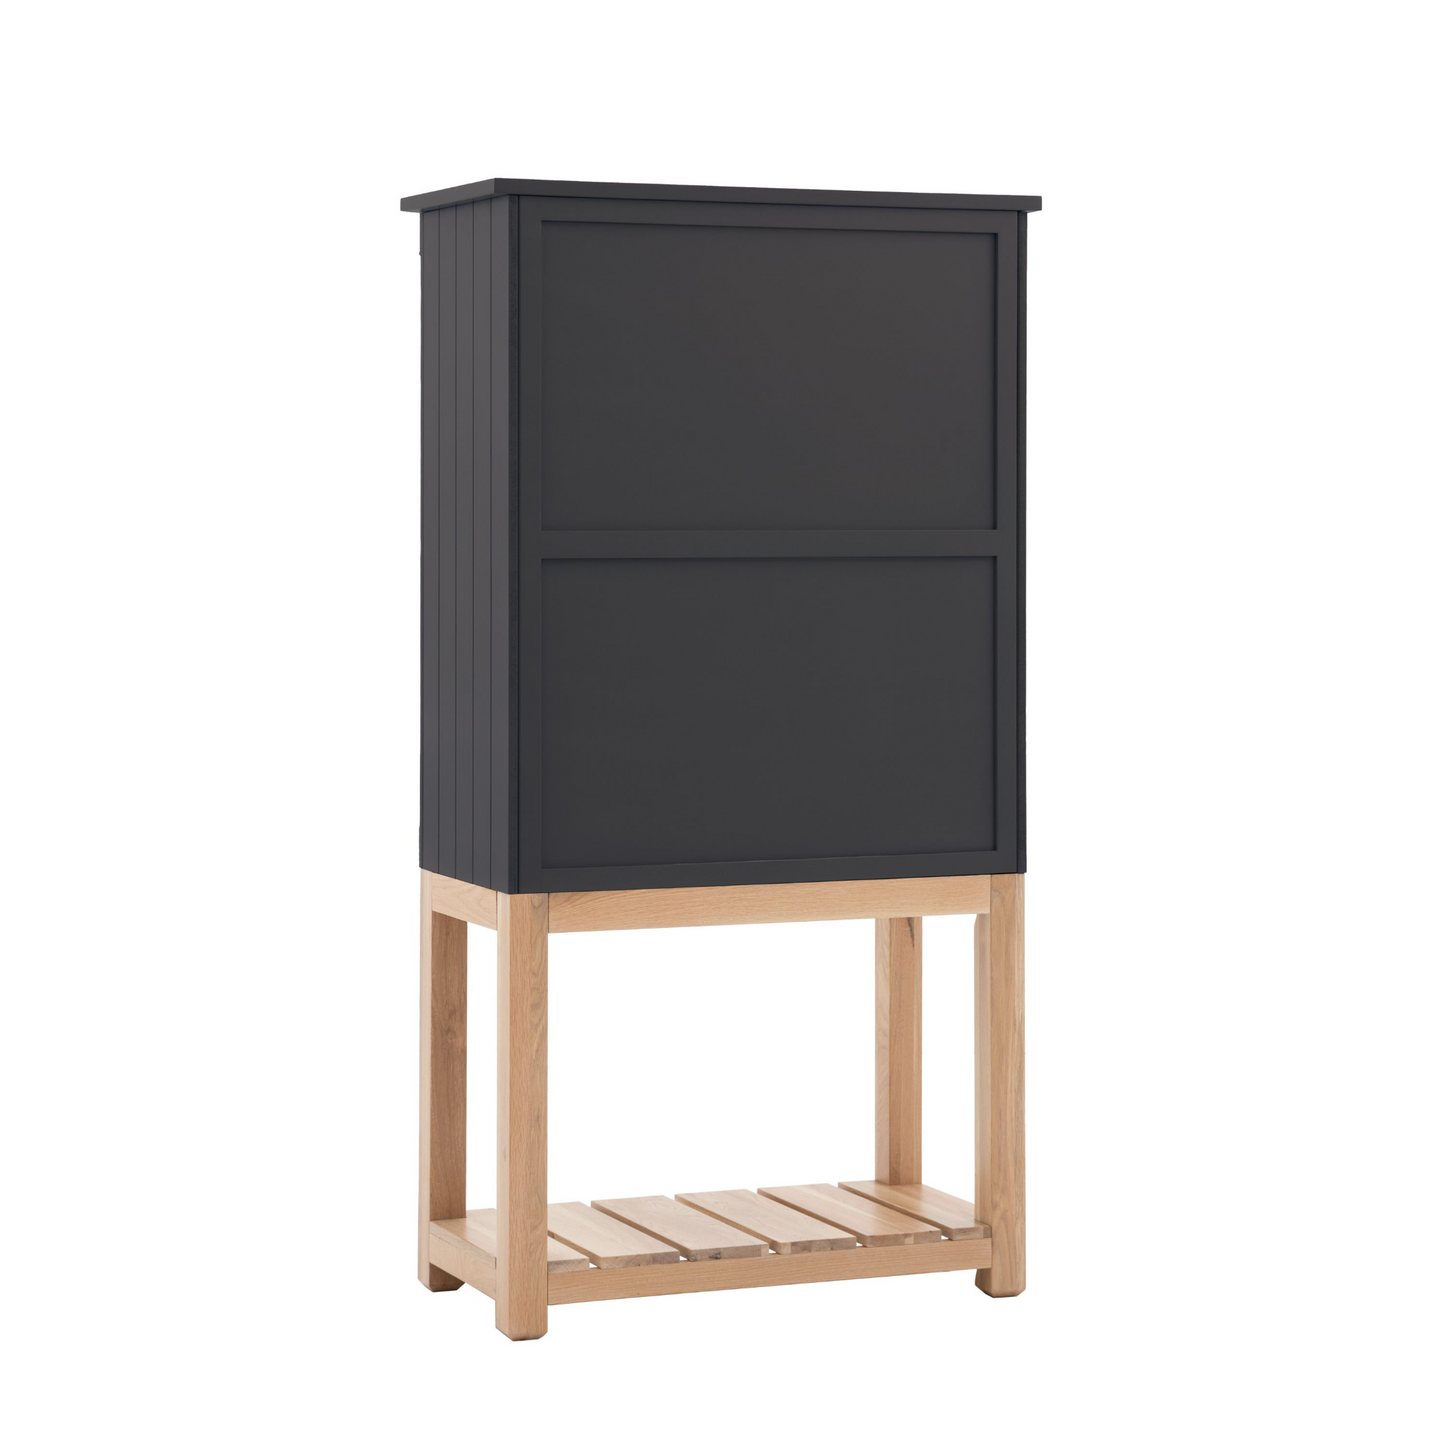 Load image into Gallery viewer, A Buckland 2 Door Storage Cupboard with wooden shelf for interior decor and home furniture.
